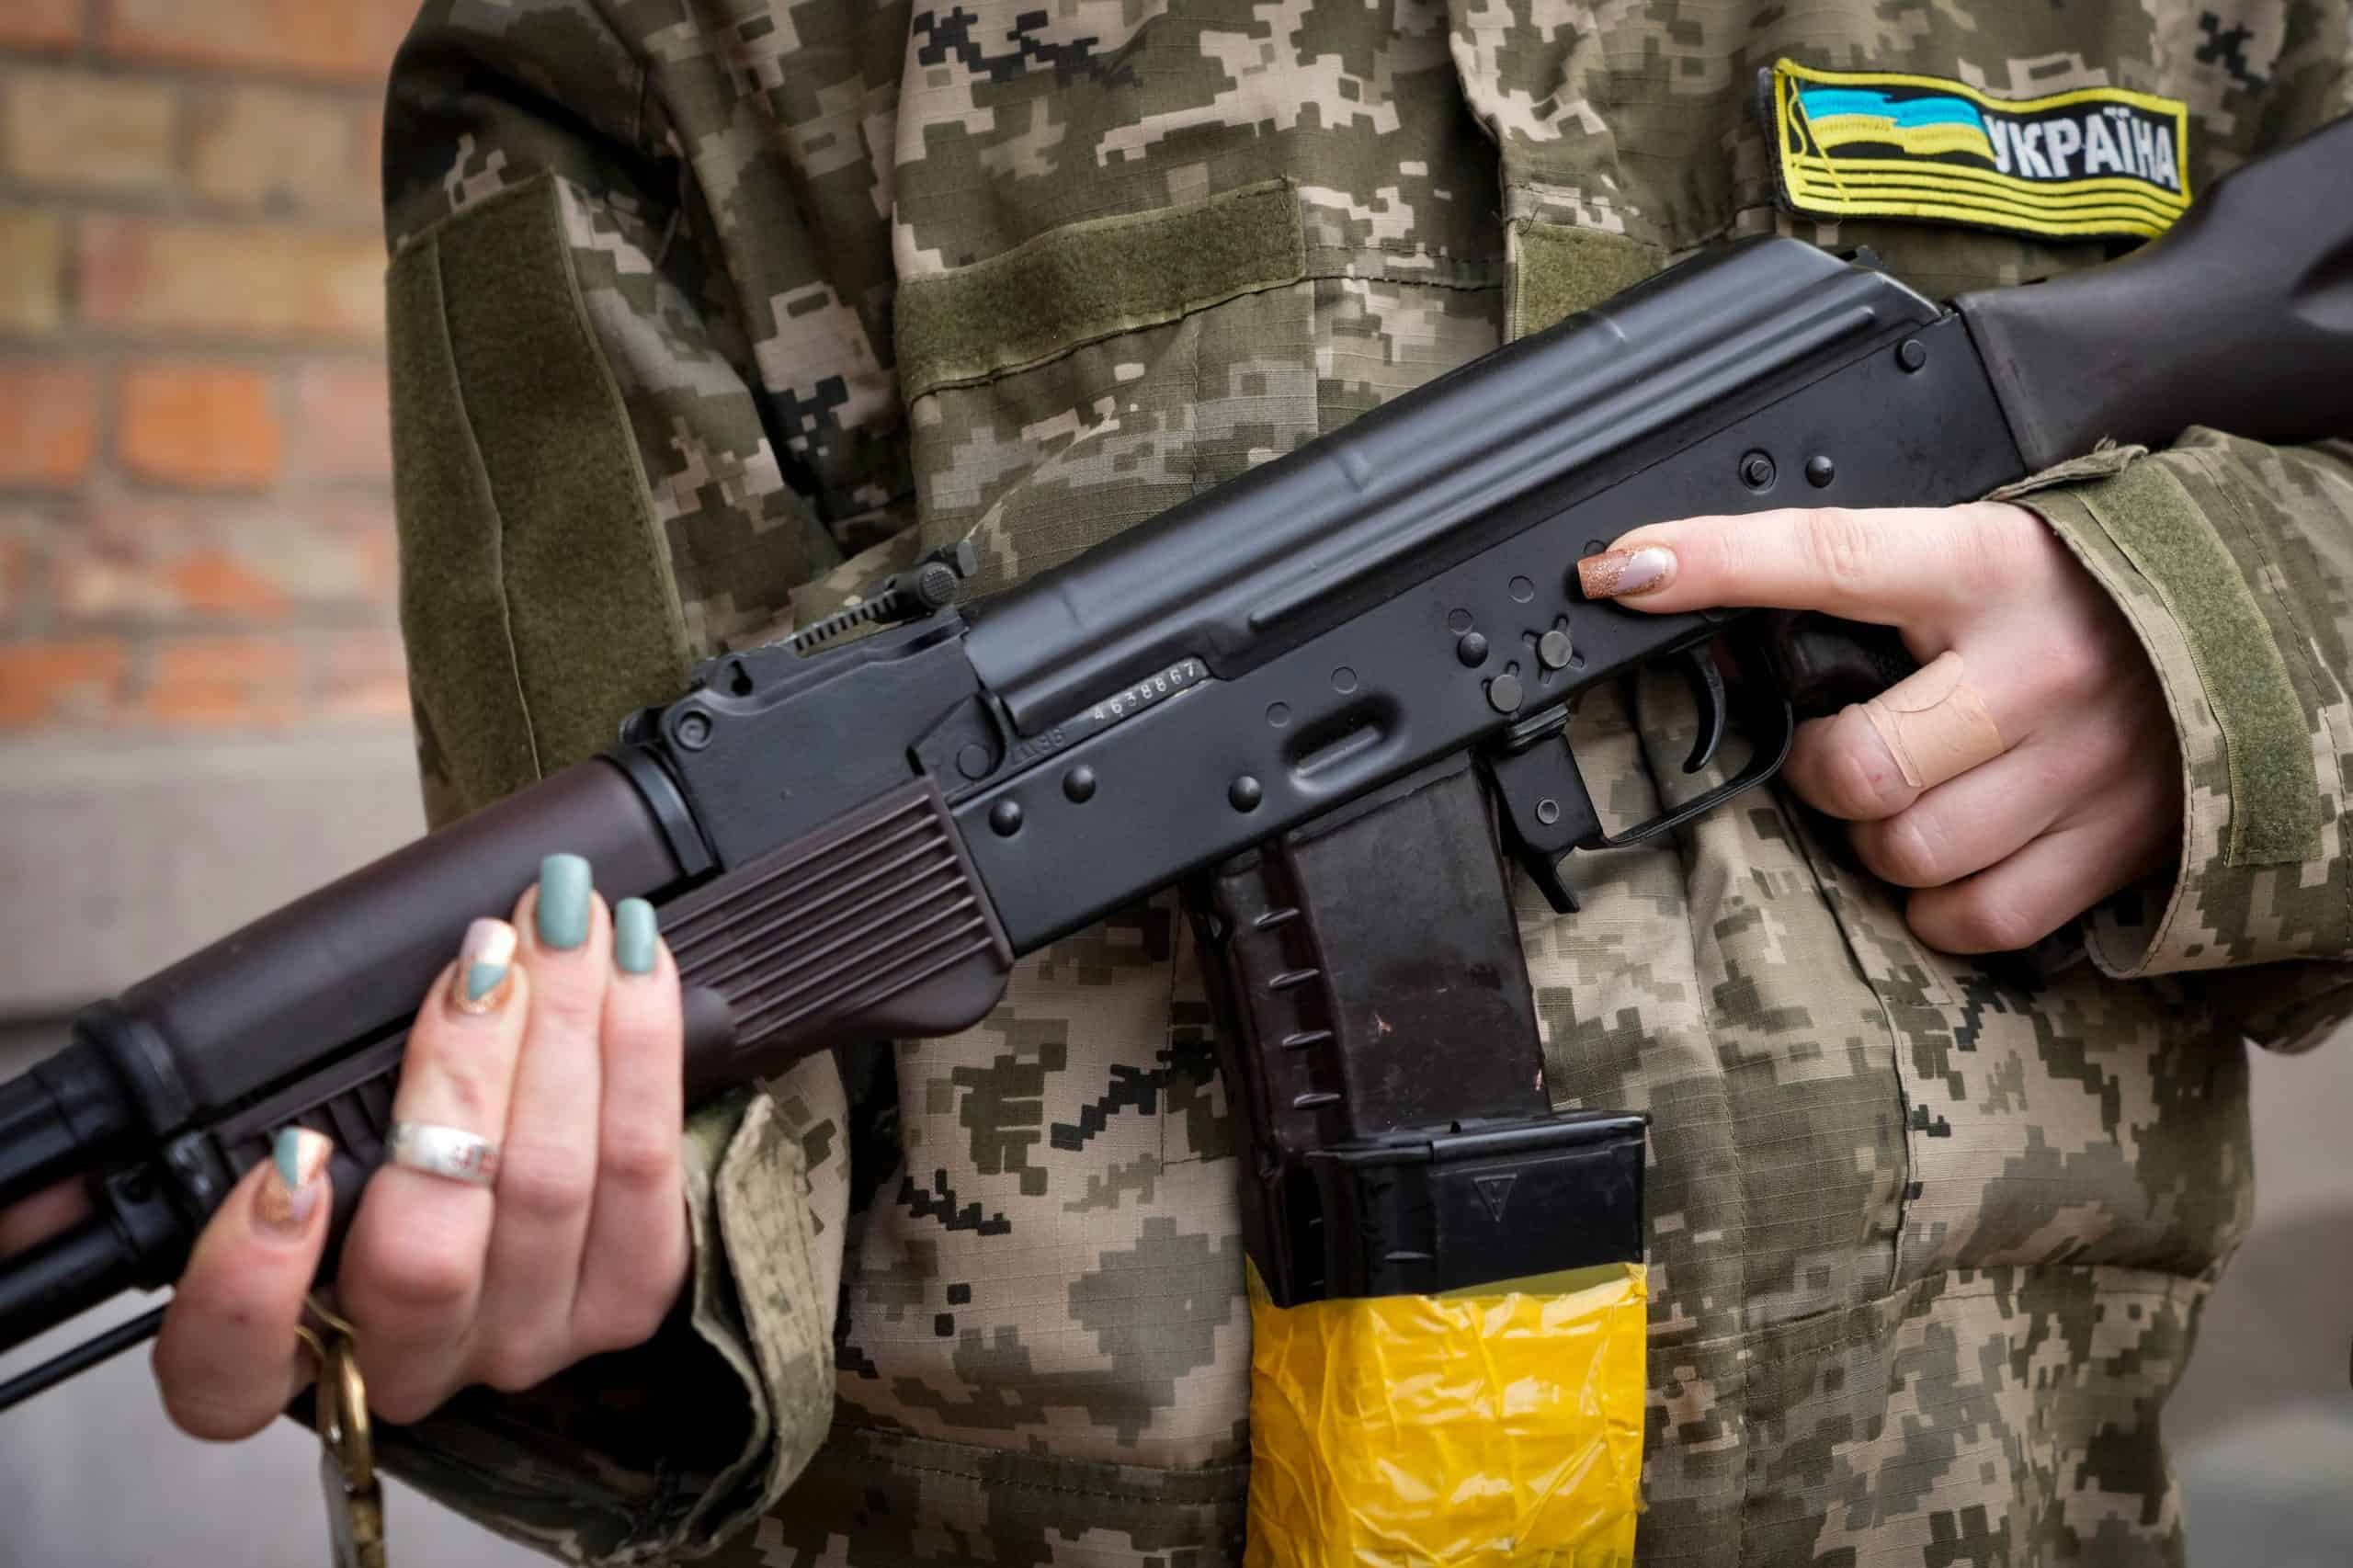 Former Miss Ukraine takes up arms to fight off Russian invaders